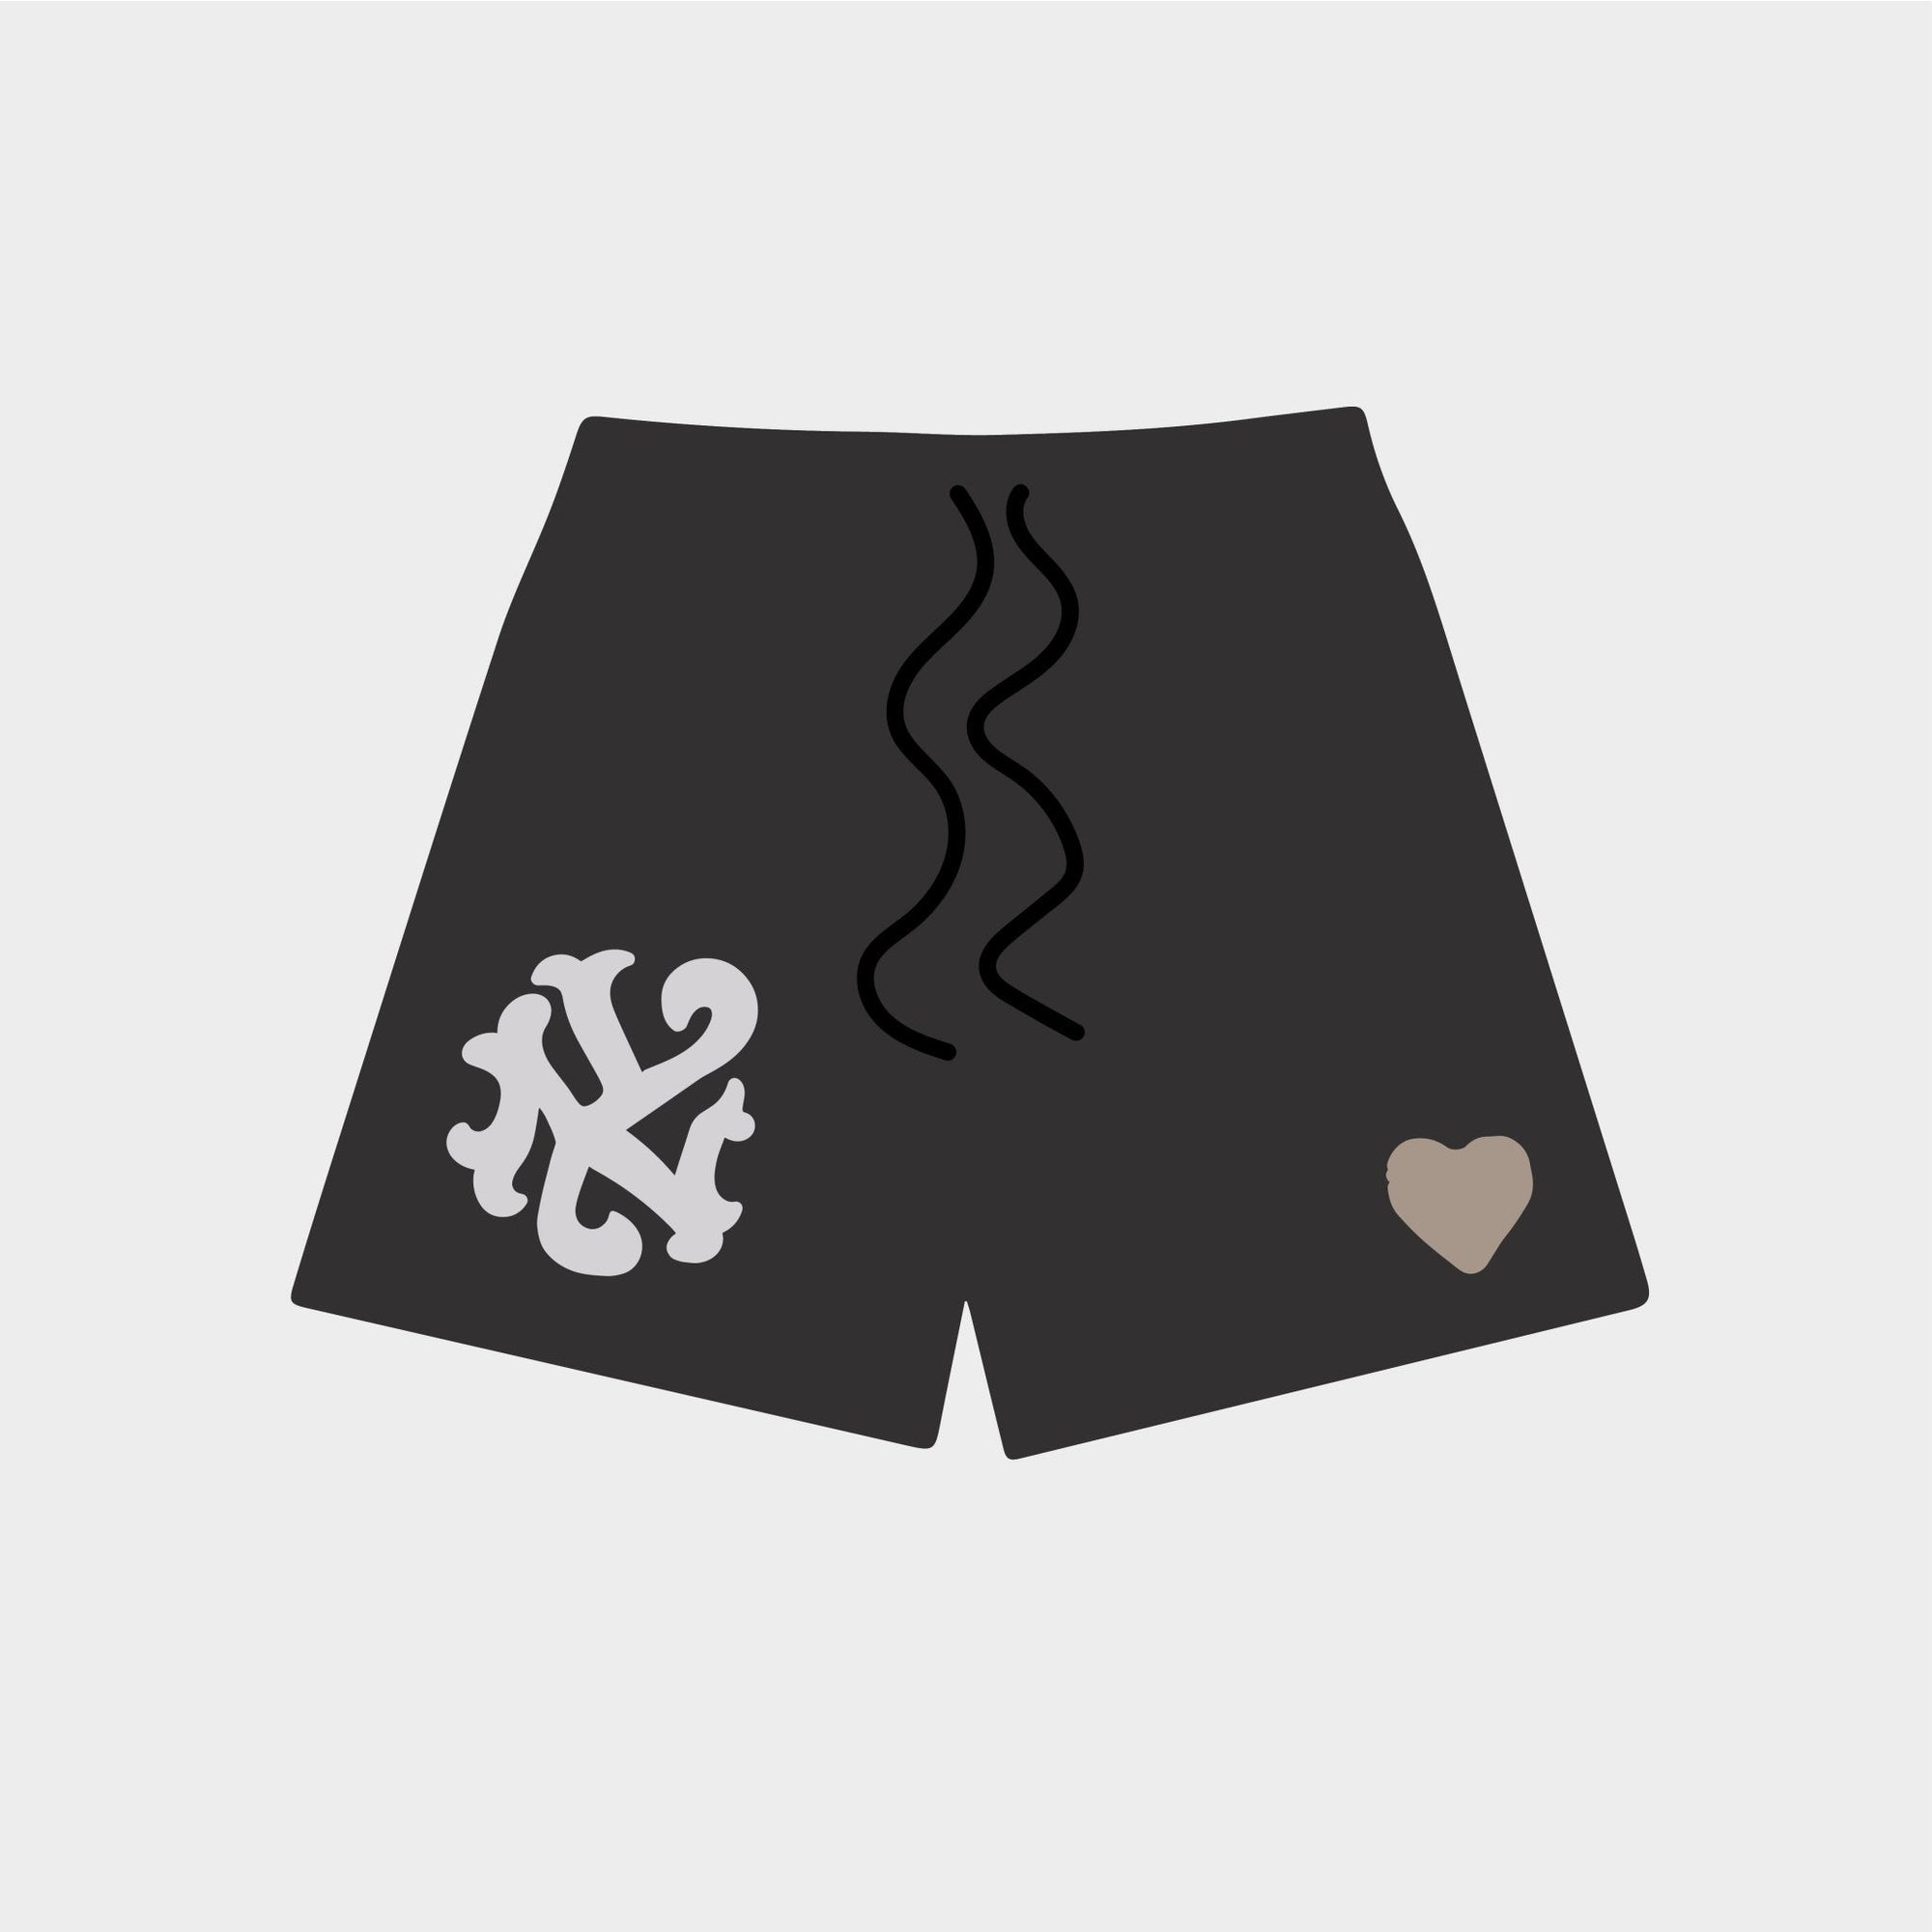 "Not NYC" Sweatshorts [Pre-Order] - RED LETTERS